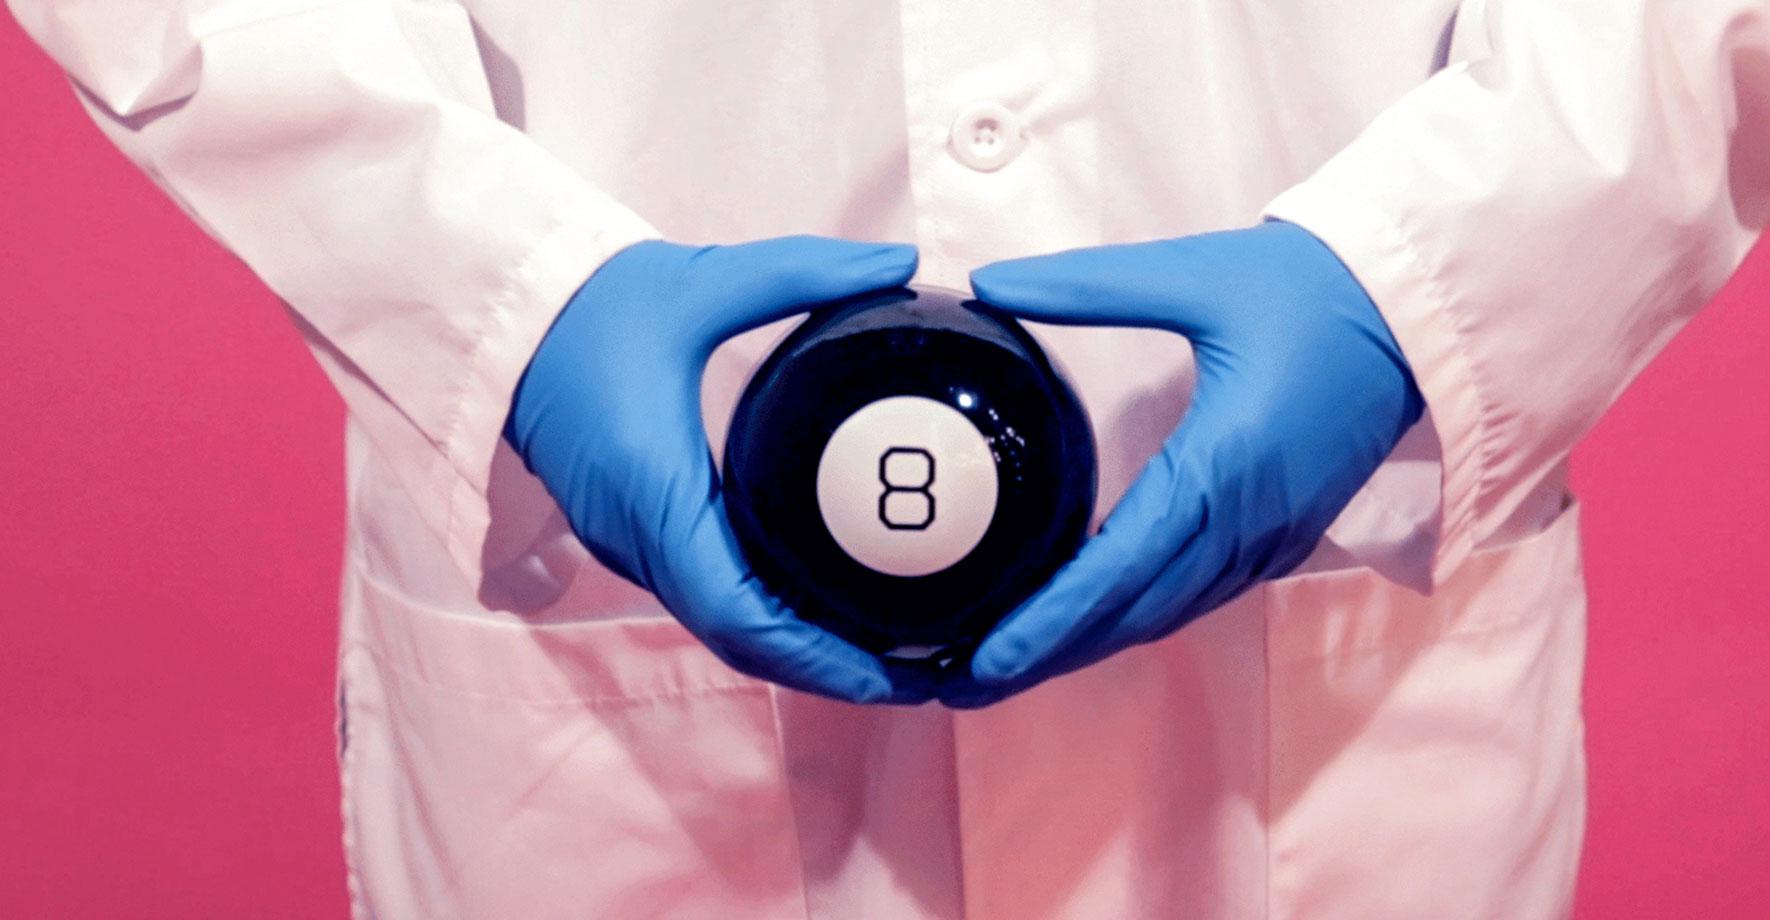 Scientist With Magic 8 Ball